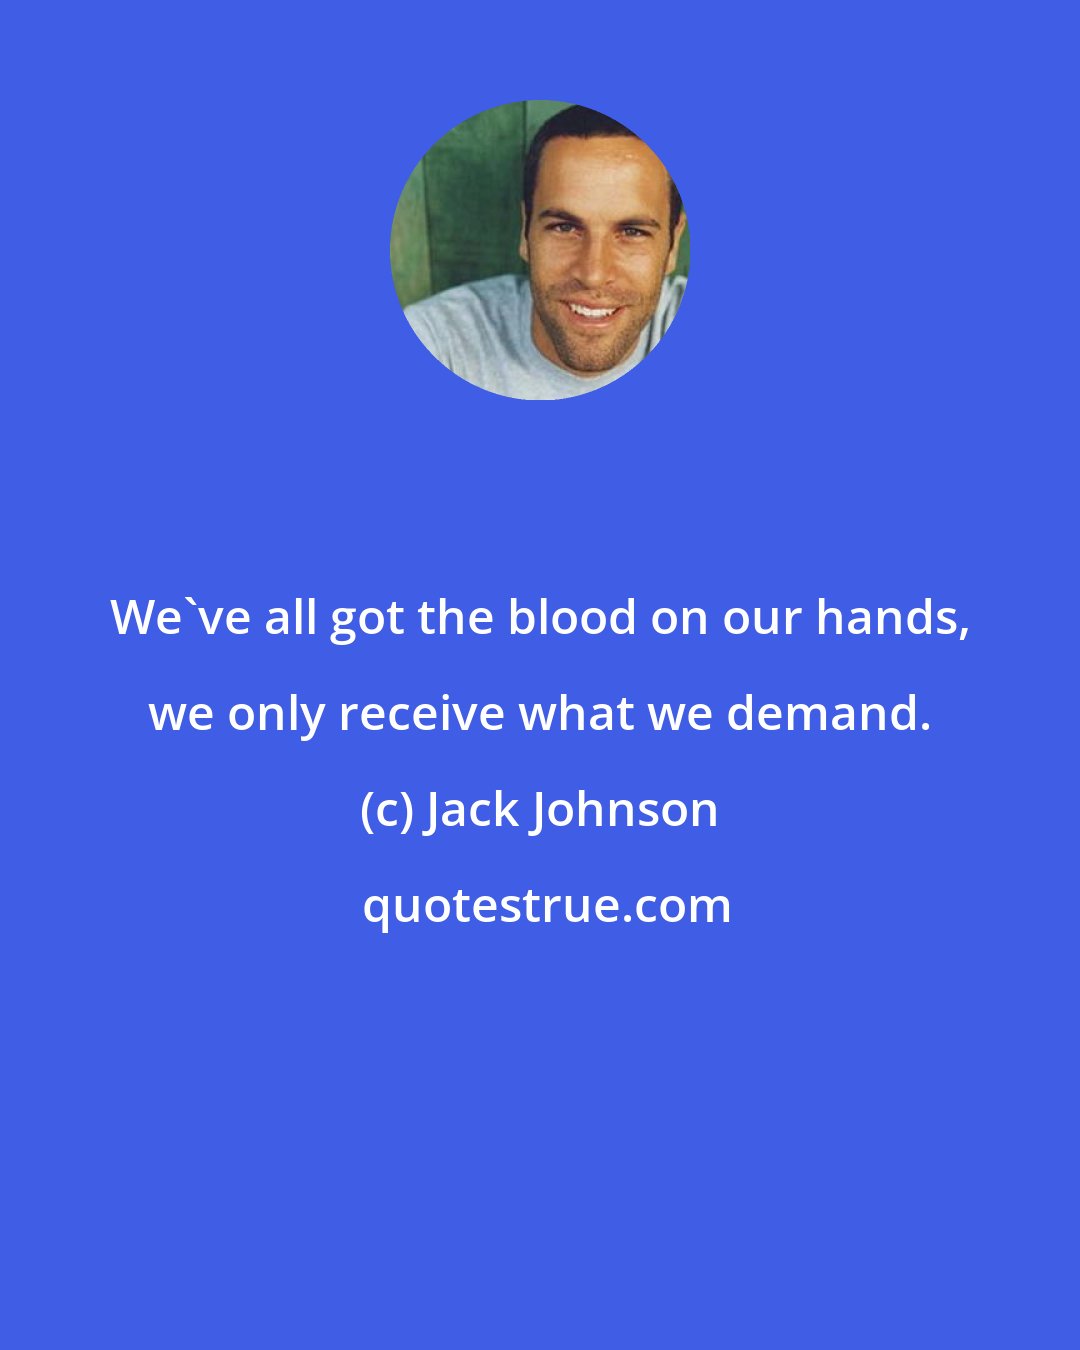 Jack Johnson: We've all got the blood on our hands, we only receive what we demand.